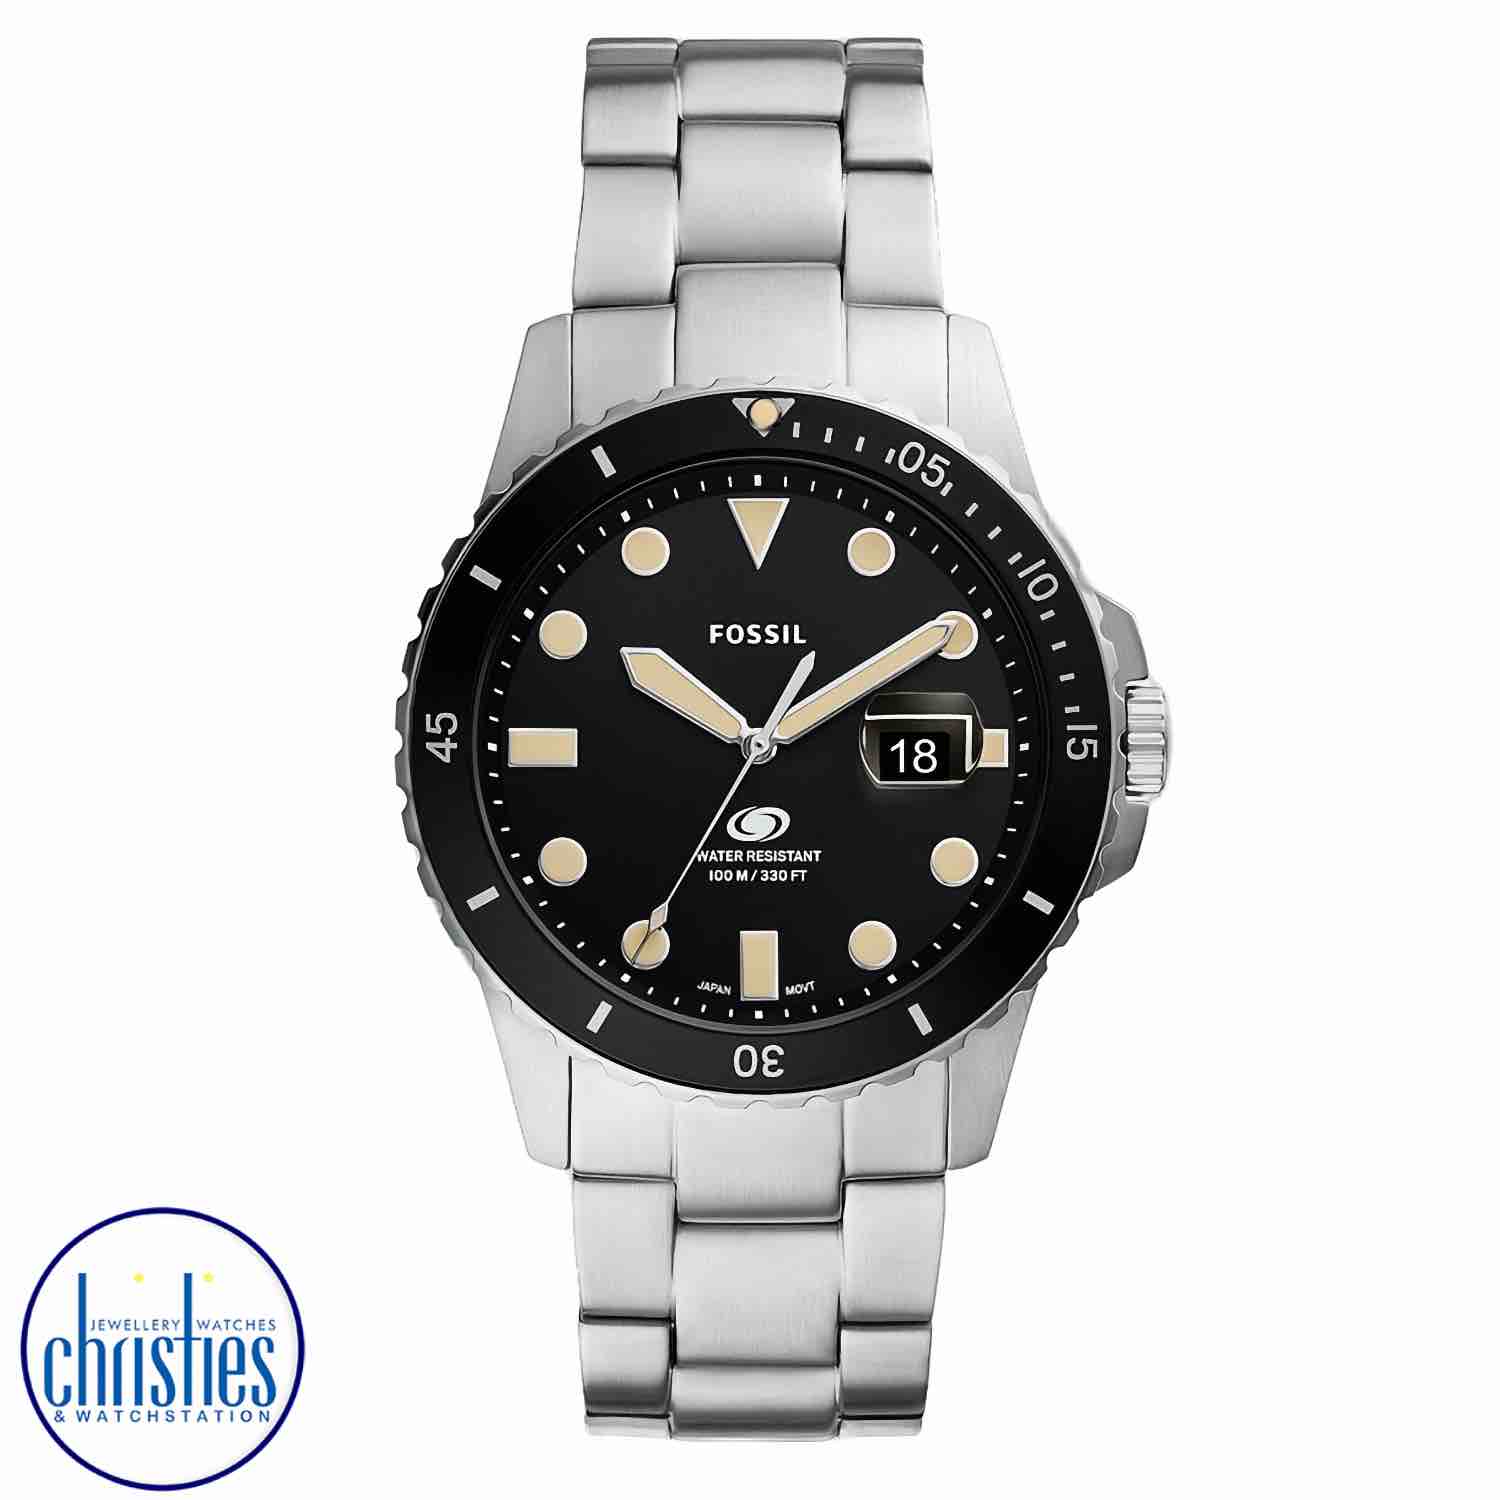 FS5952 Fossil Blue Stainless Steel Watch. FS5952 Fossil Blue Three-Hand Date Stainless Steel WatchAfterpay - Split your purchase into 4 instalments - Pay for your purchase over 4 instalments, due every two weeks.